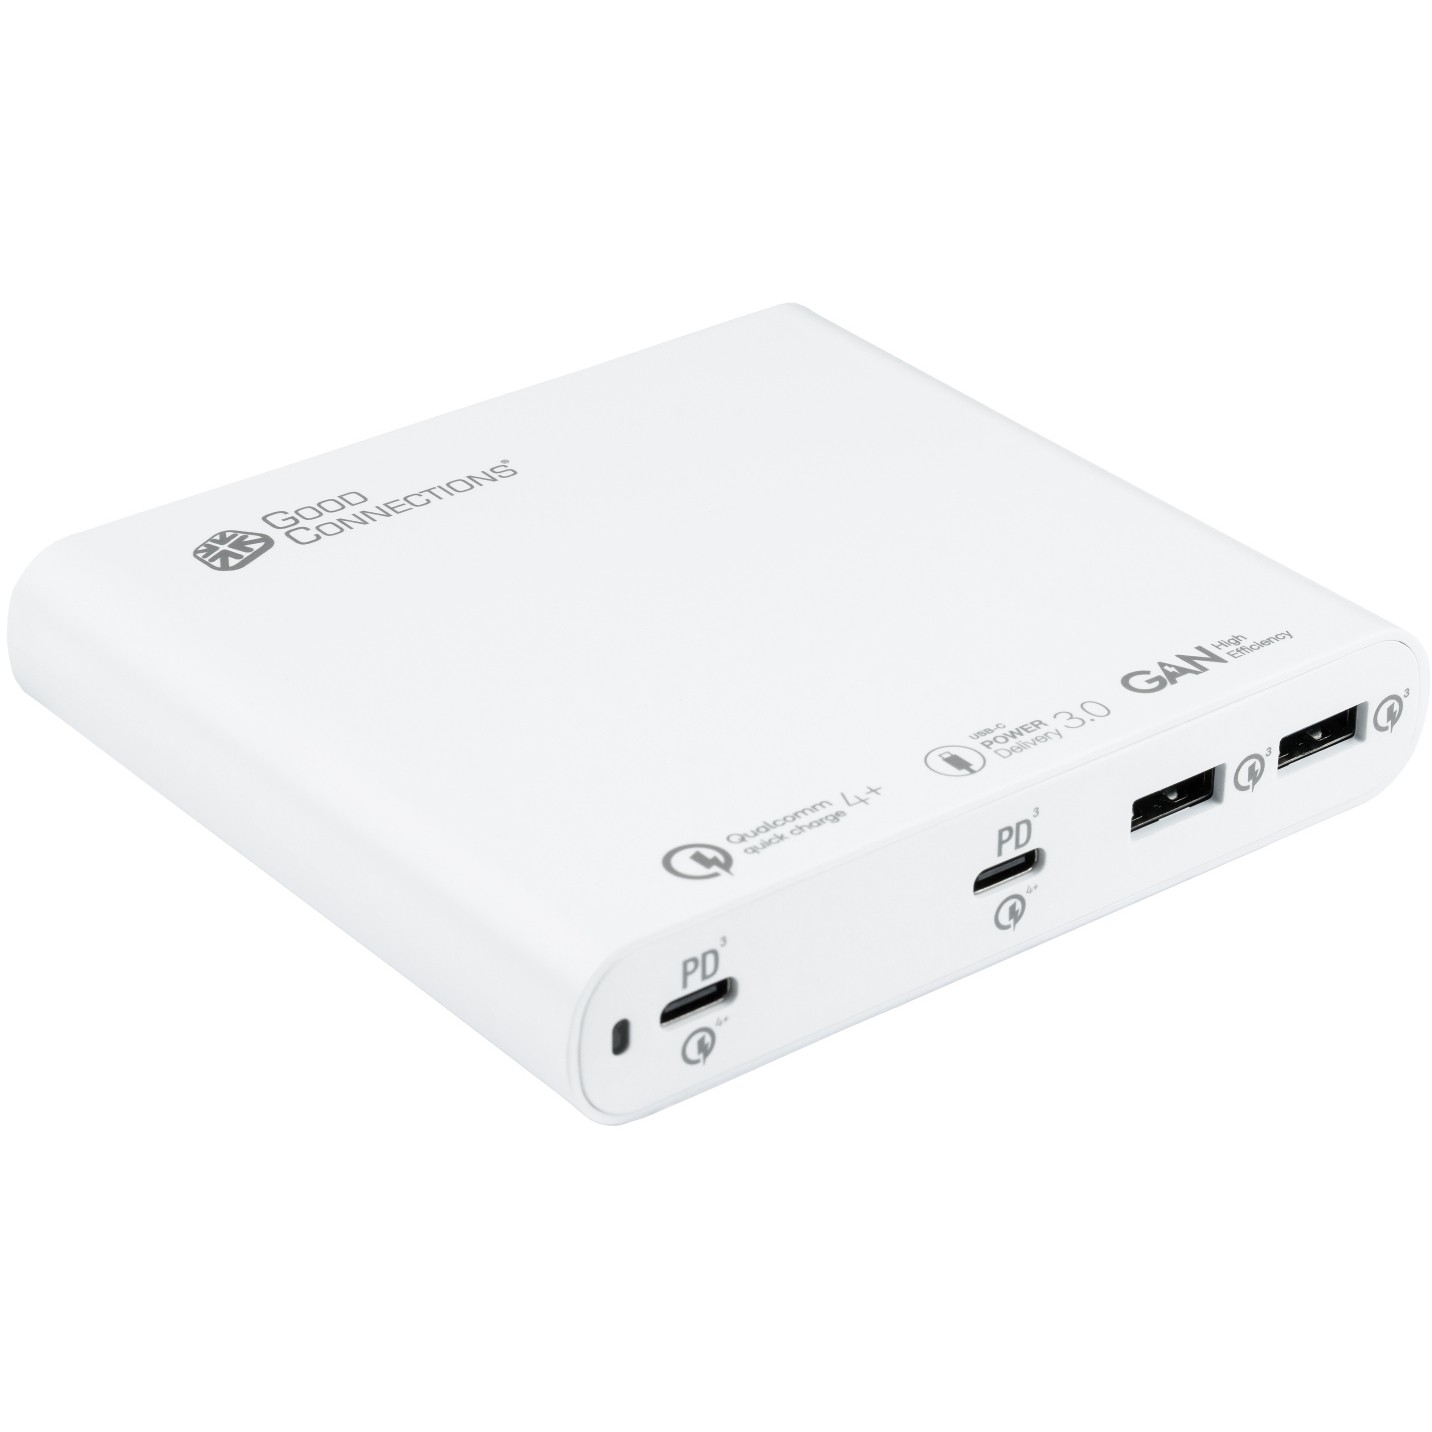 Alcasa PCA-D001W mobile device charger - PCA-D001W